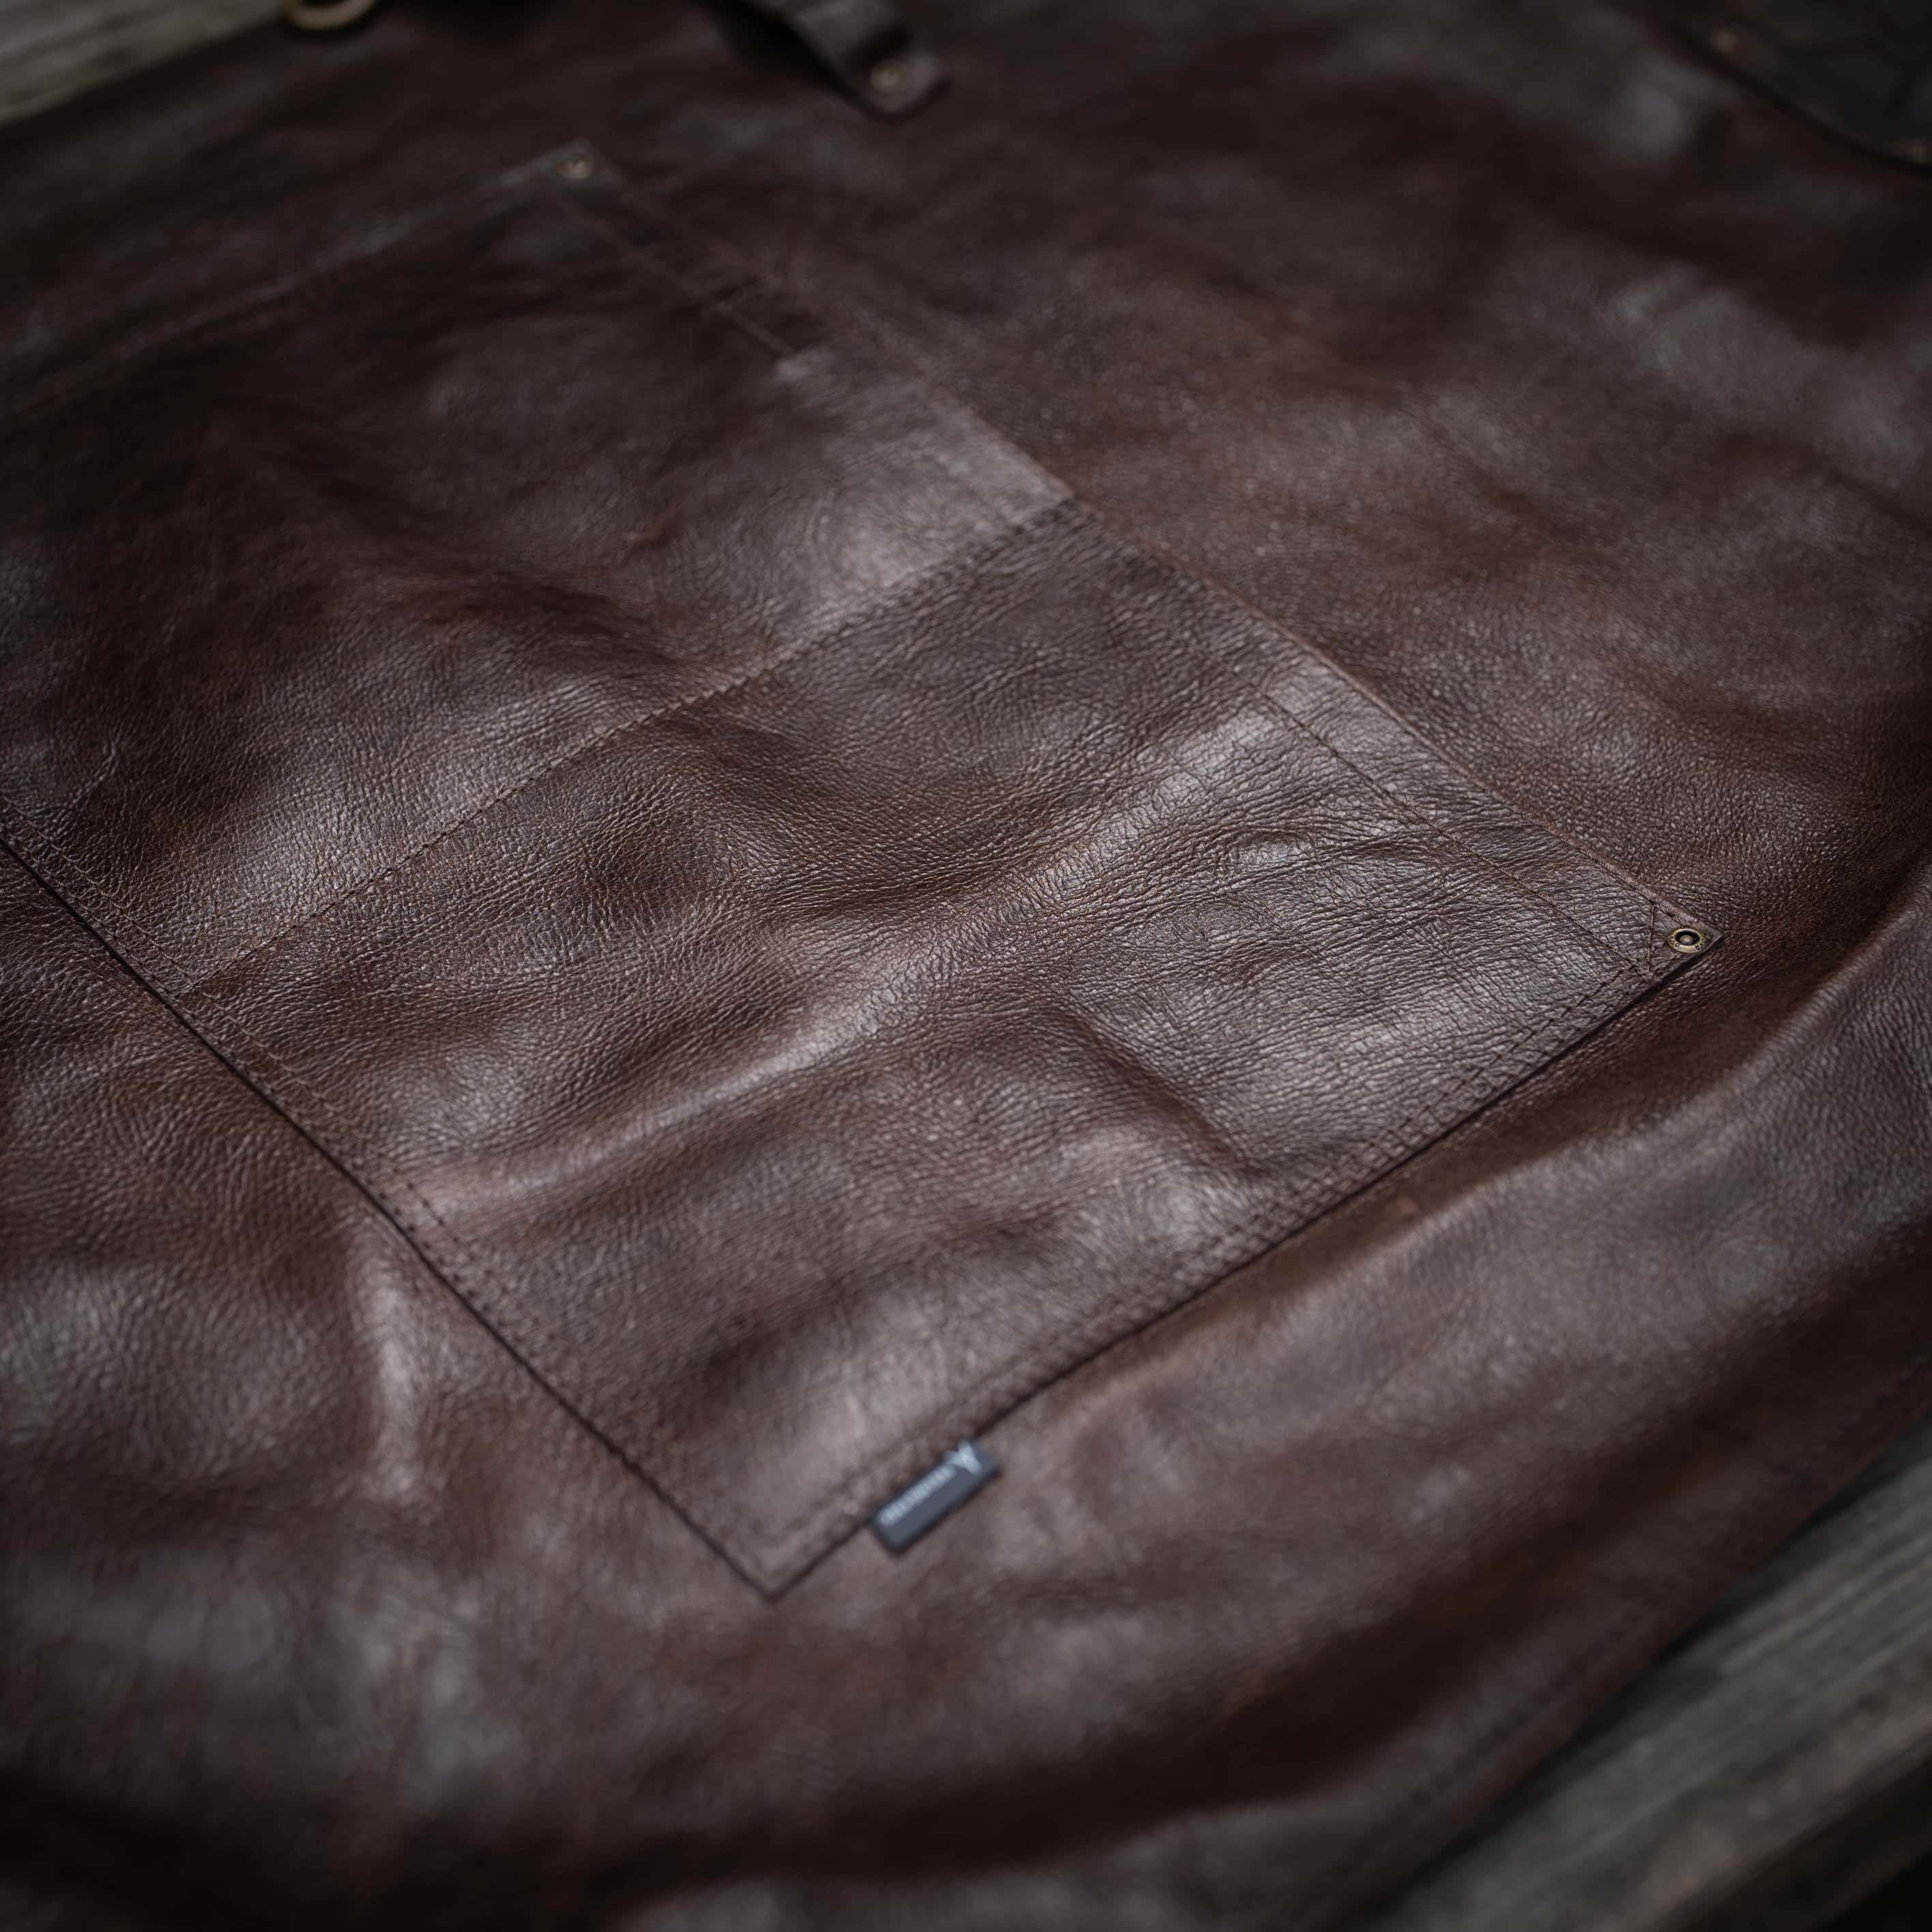 Leather Apron Brown